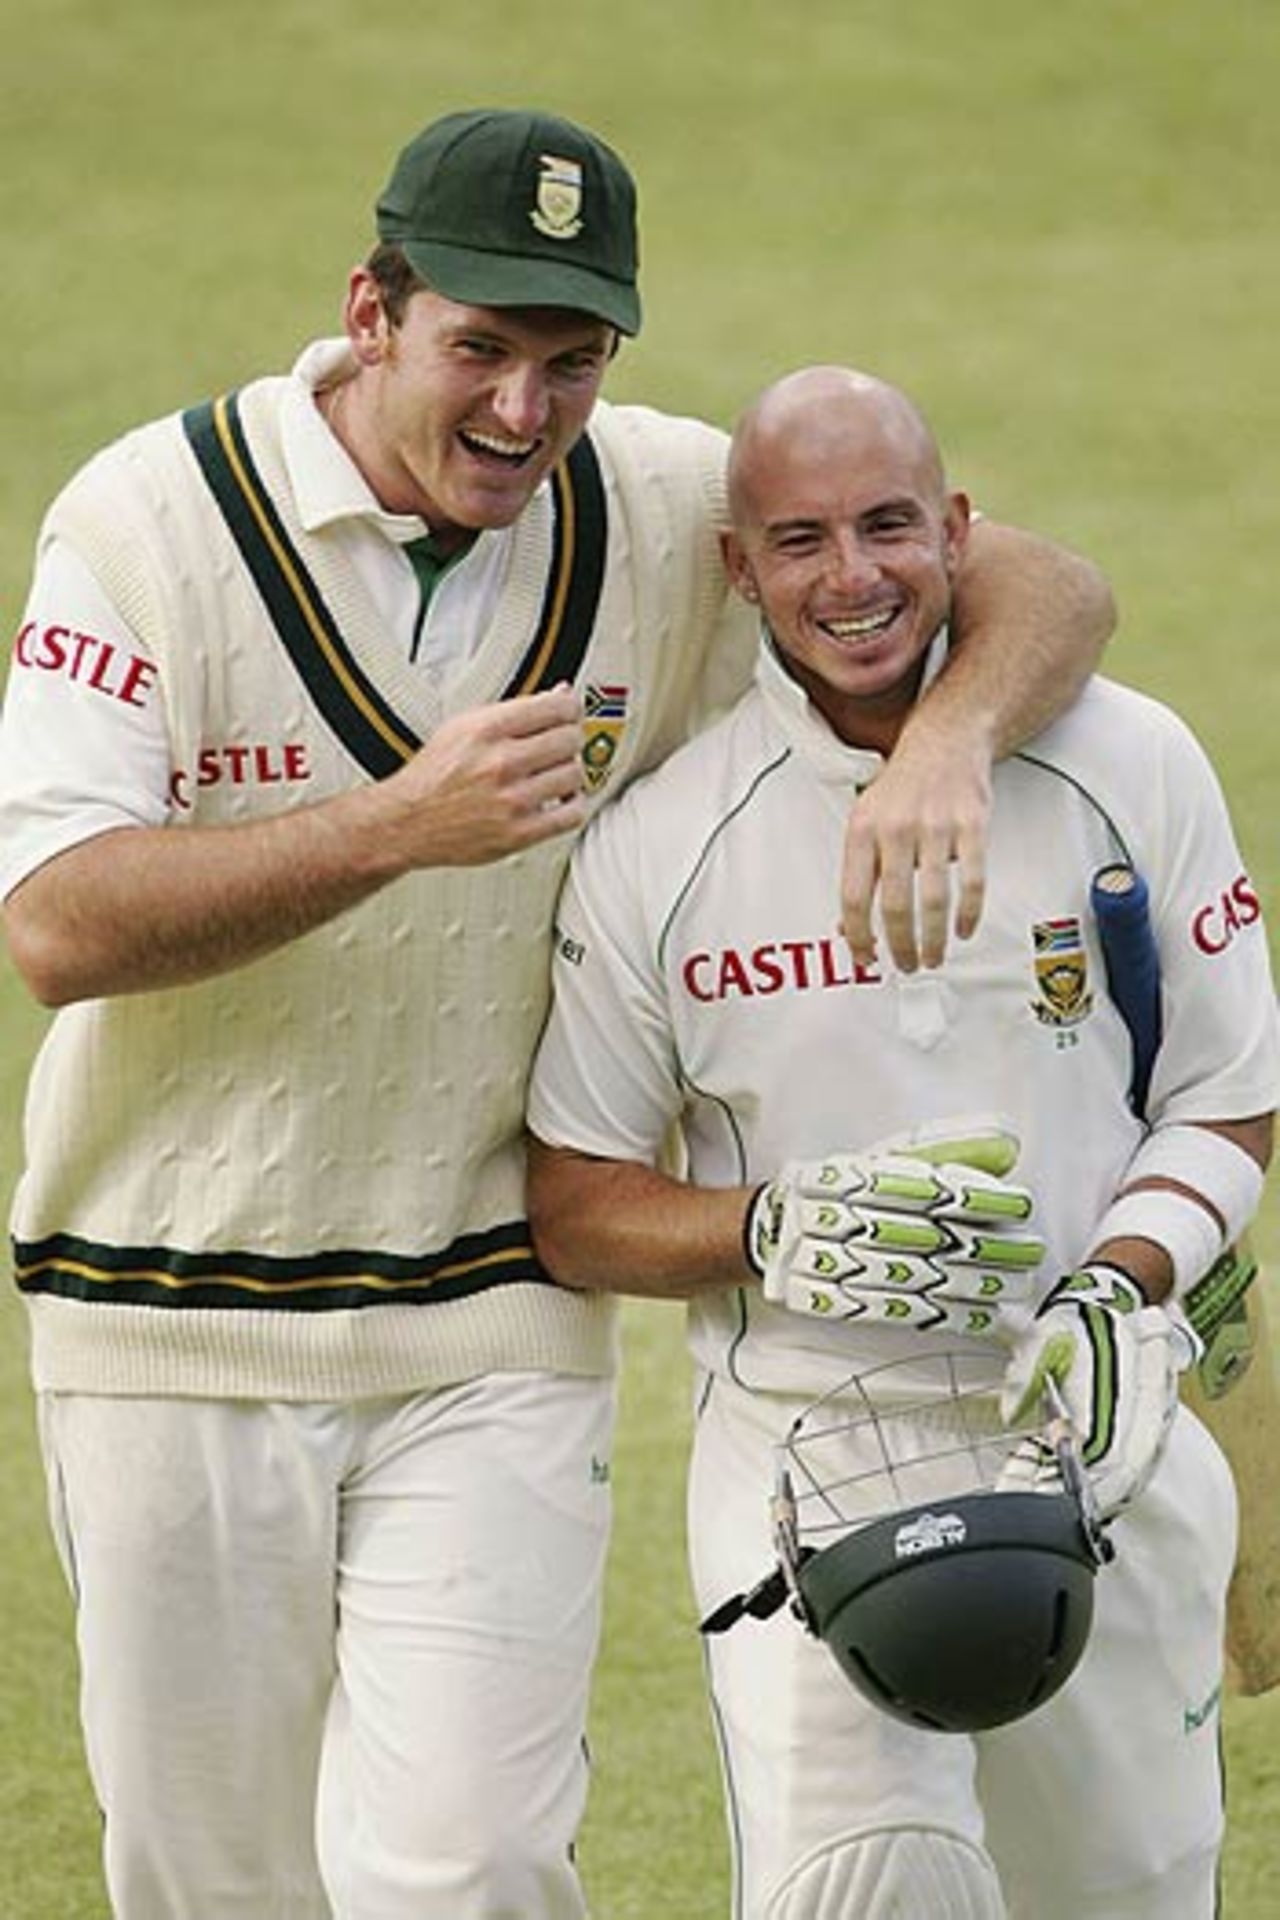 Graeme Smith and Herschelle Gibbs share a light moment after the win, South Africa v India, 3rd Test, Cape Town, 5th day, January 6, 2007